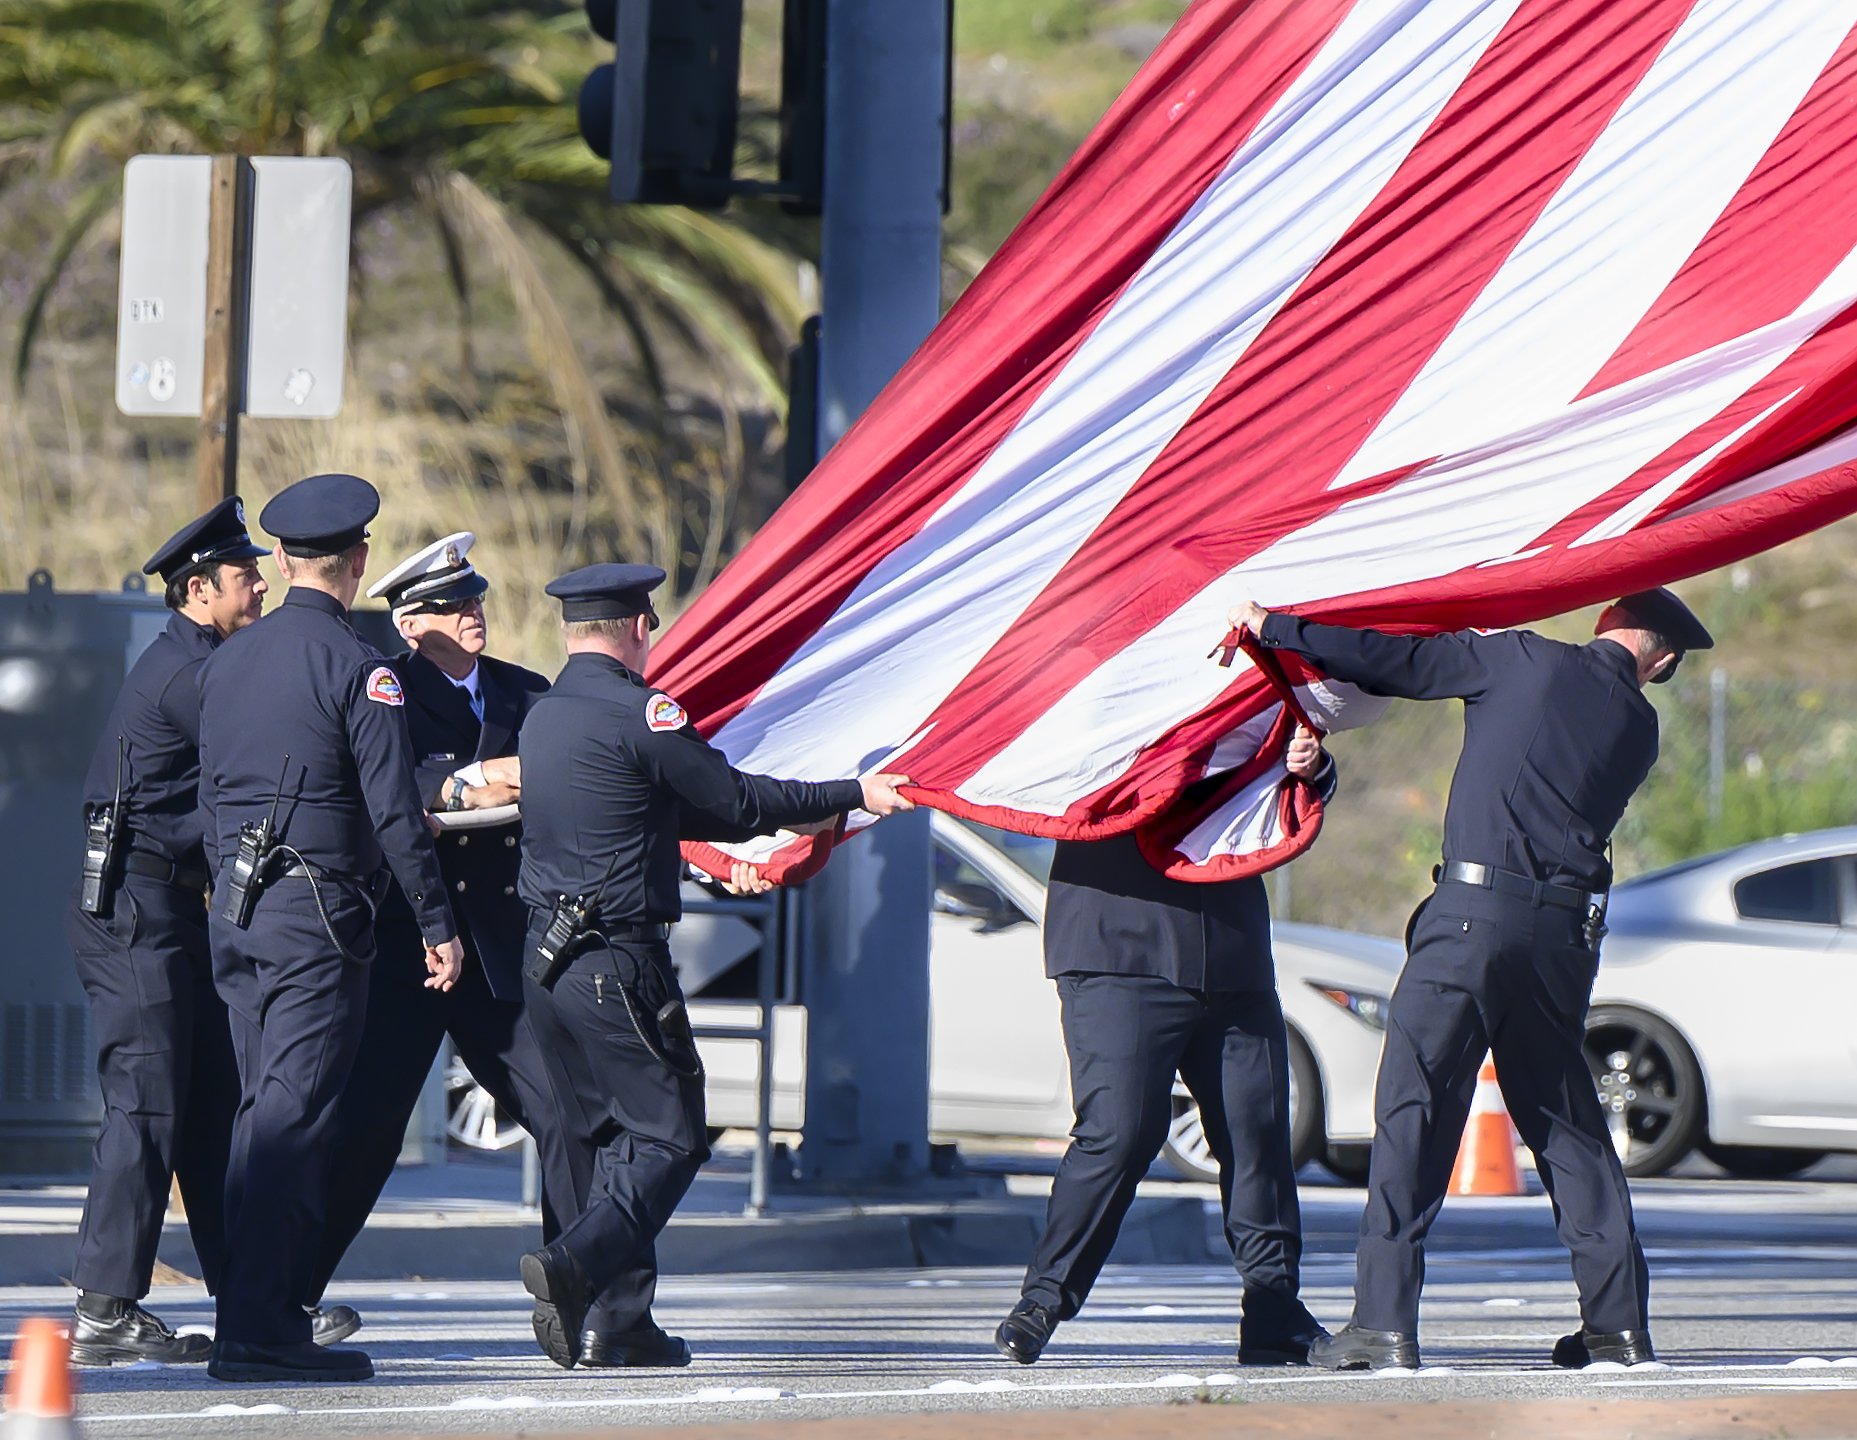  Fire fighters hustle to get control of a wind-whipped flag before the funeral procession for Huntington Beach Police Officer Nicholas Vella in Anaheim on Tuesday, March 8, 2022. Vella died in a helicopter crash Feb. 19 off the waters in Newport Beac